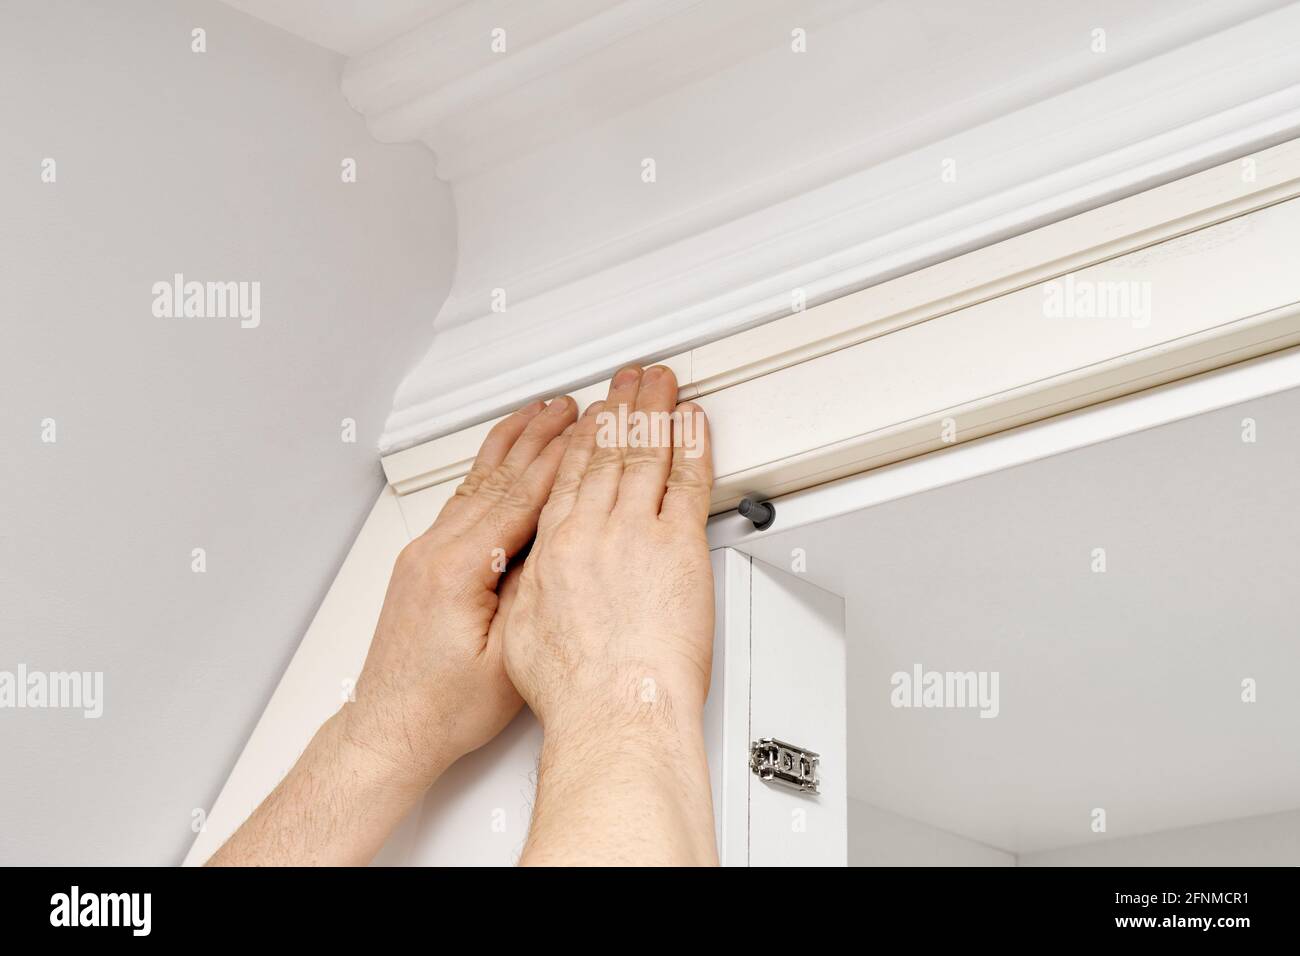 Skilled handyman gluing wooden molding during wardrobe installation in light room extreme close view Stock Photo